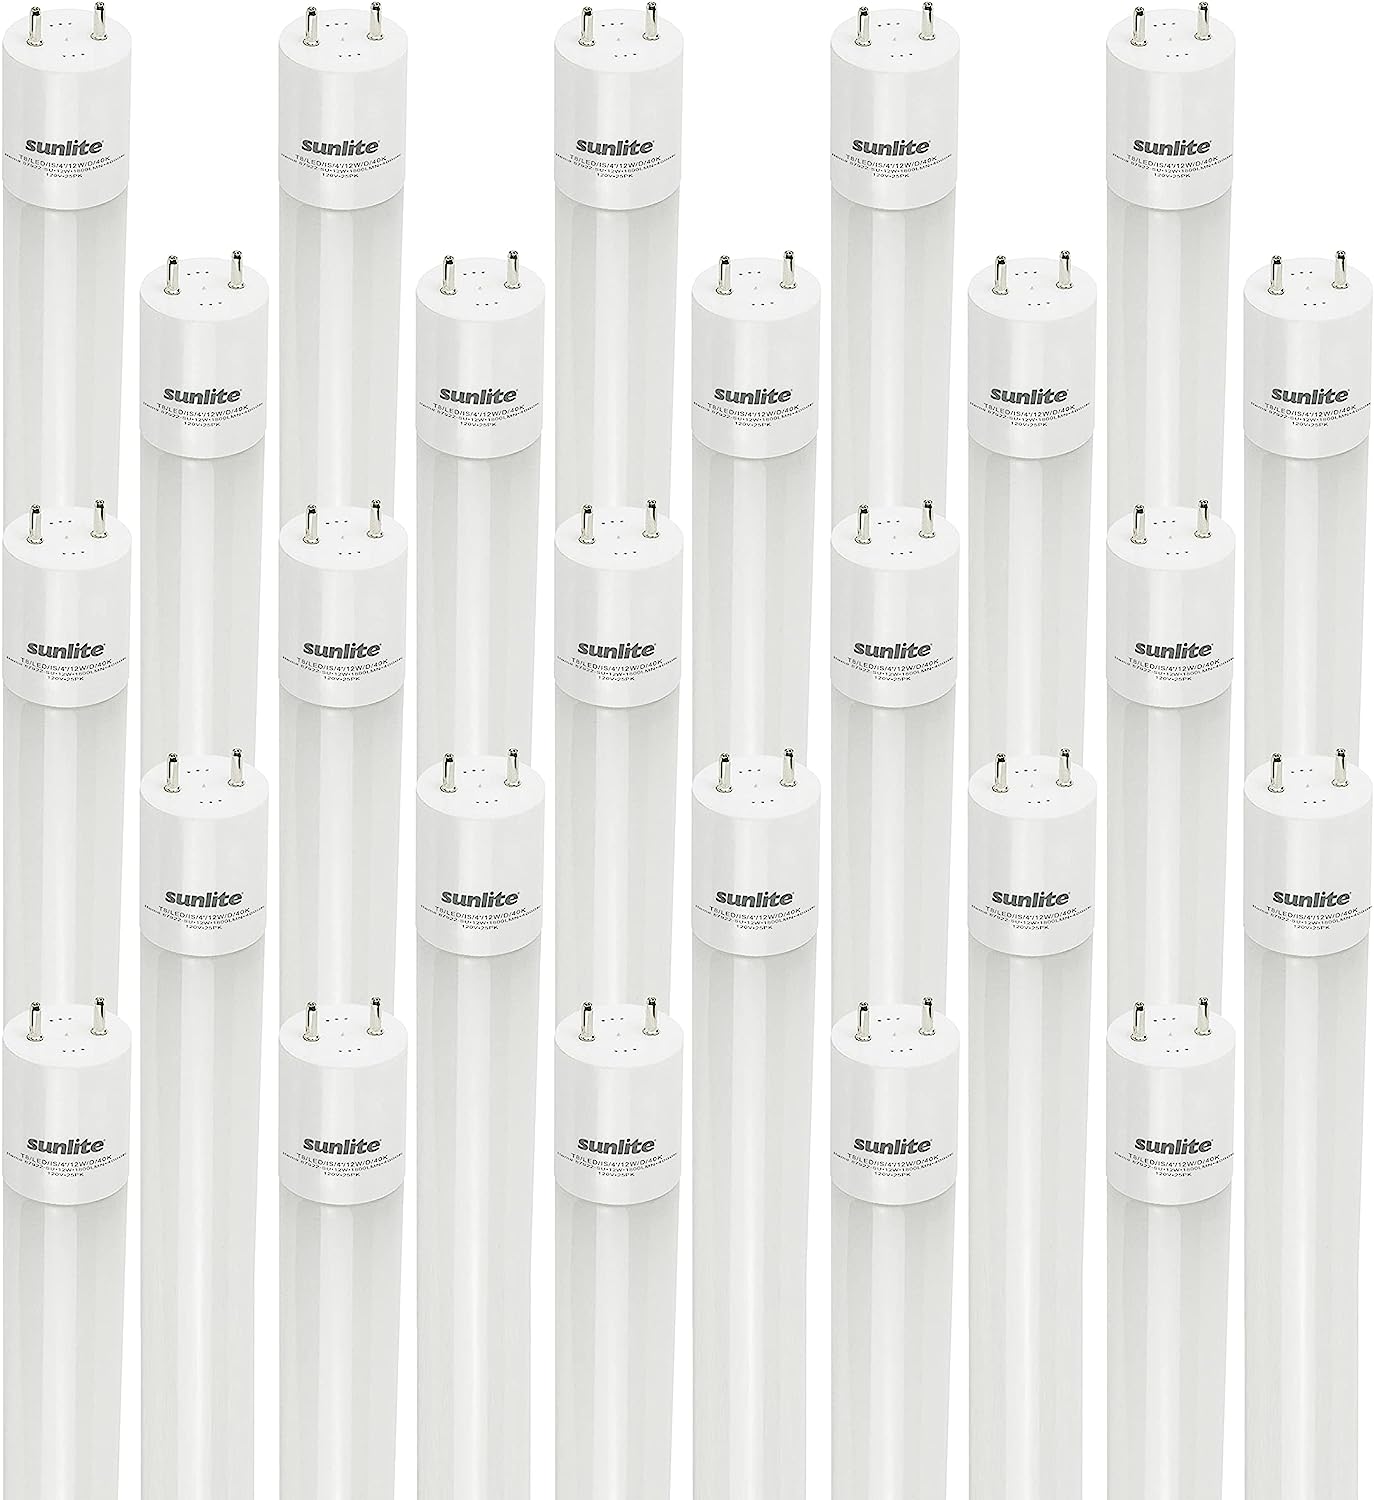 Sunlite 87922 LED T8 Plug & Play Light Tube (Type A) 4 ft, 12 Watt (32W Equivalent) 1800 Lumens, Medium G13 Bi-Pin Base, Dual End Connection, Electronic Ballast Compatible, 4000K Cool White, 25 Pack